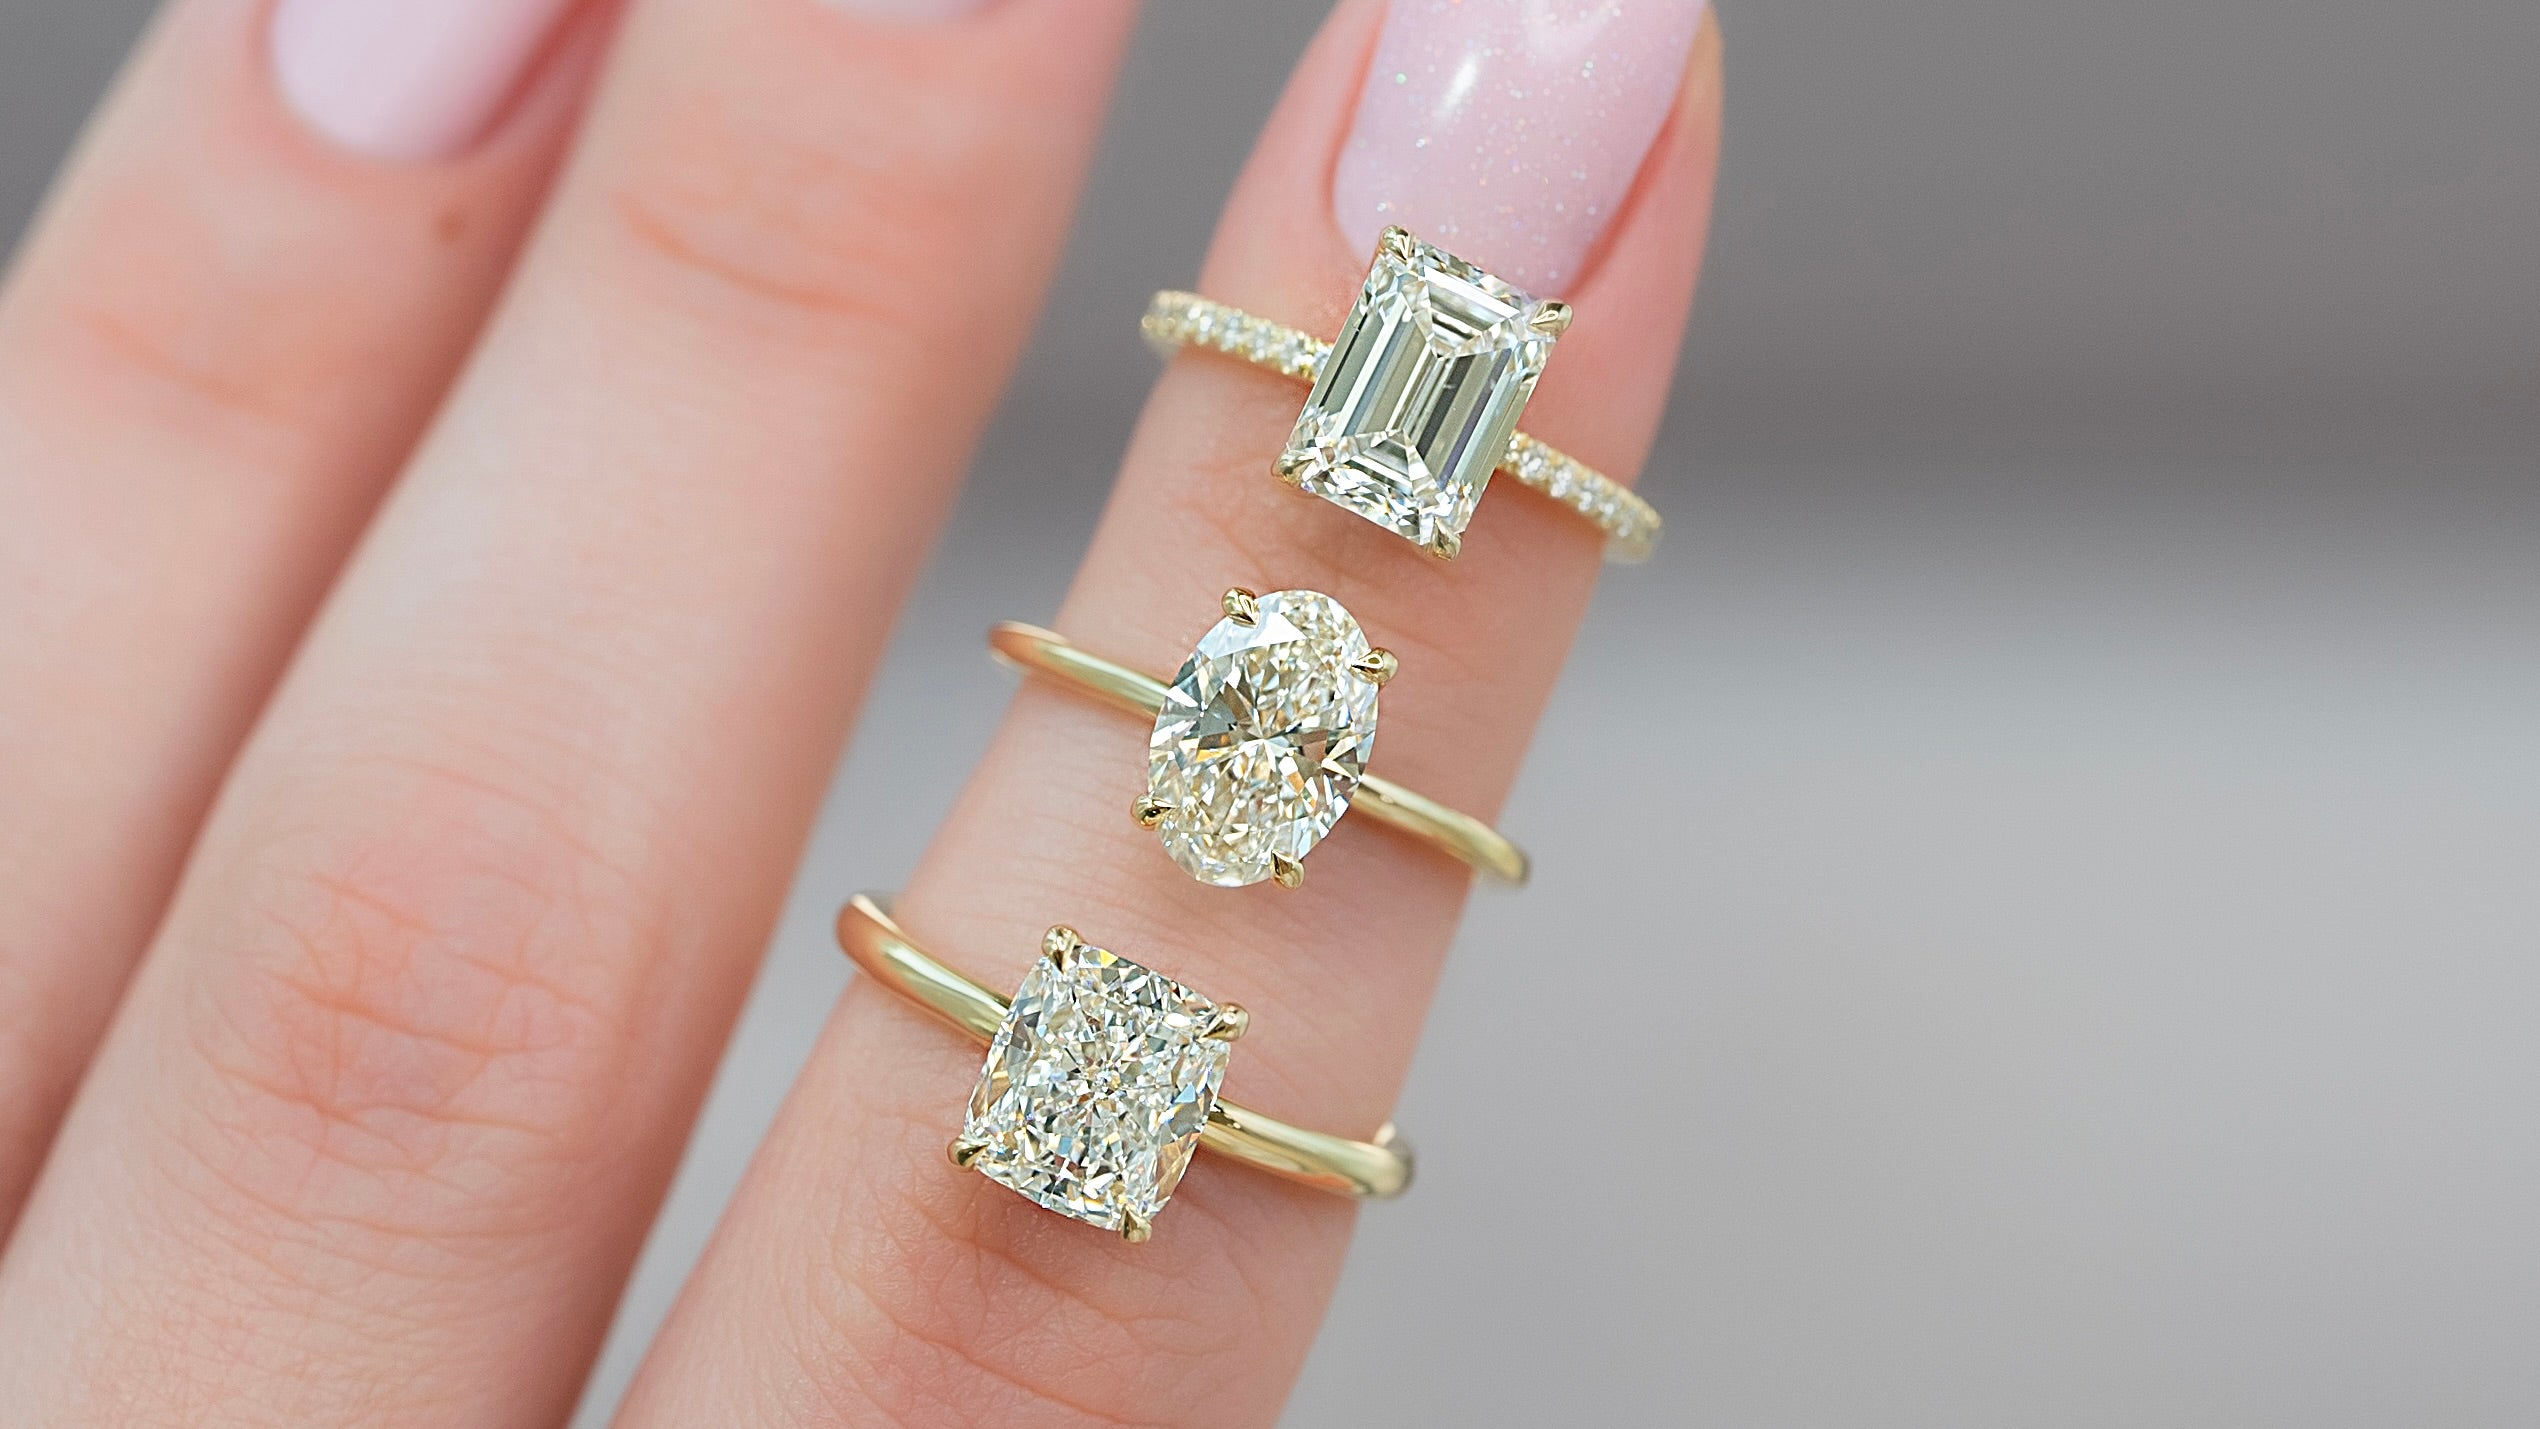 Engagement Ring Style Finder Quiz - Find Her Engagement Ring Style